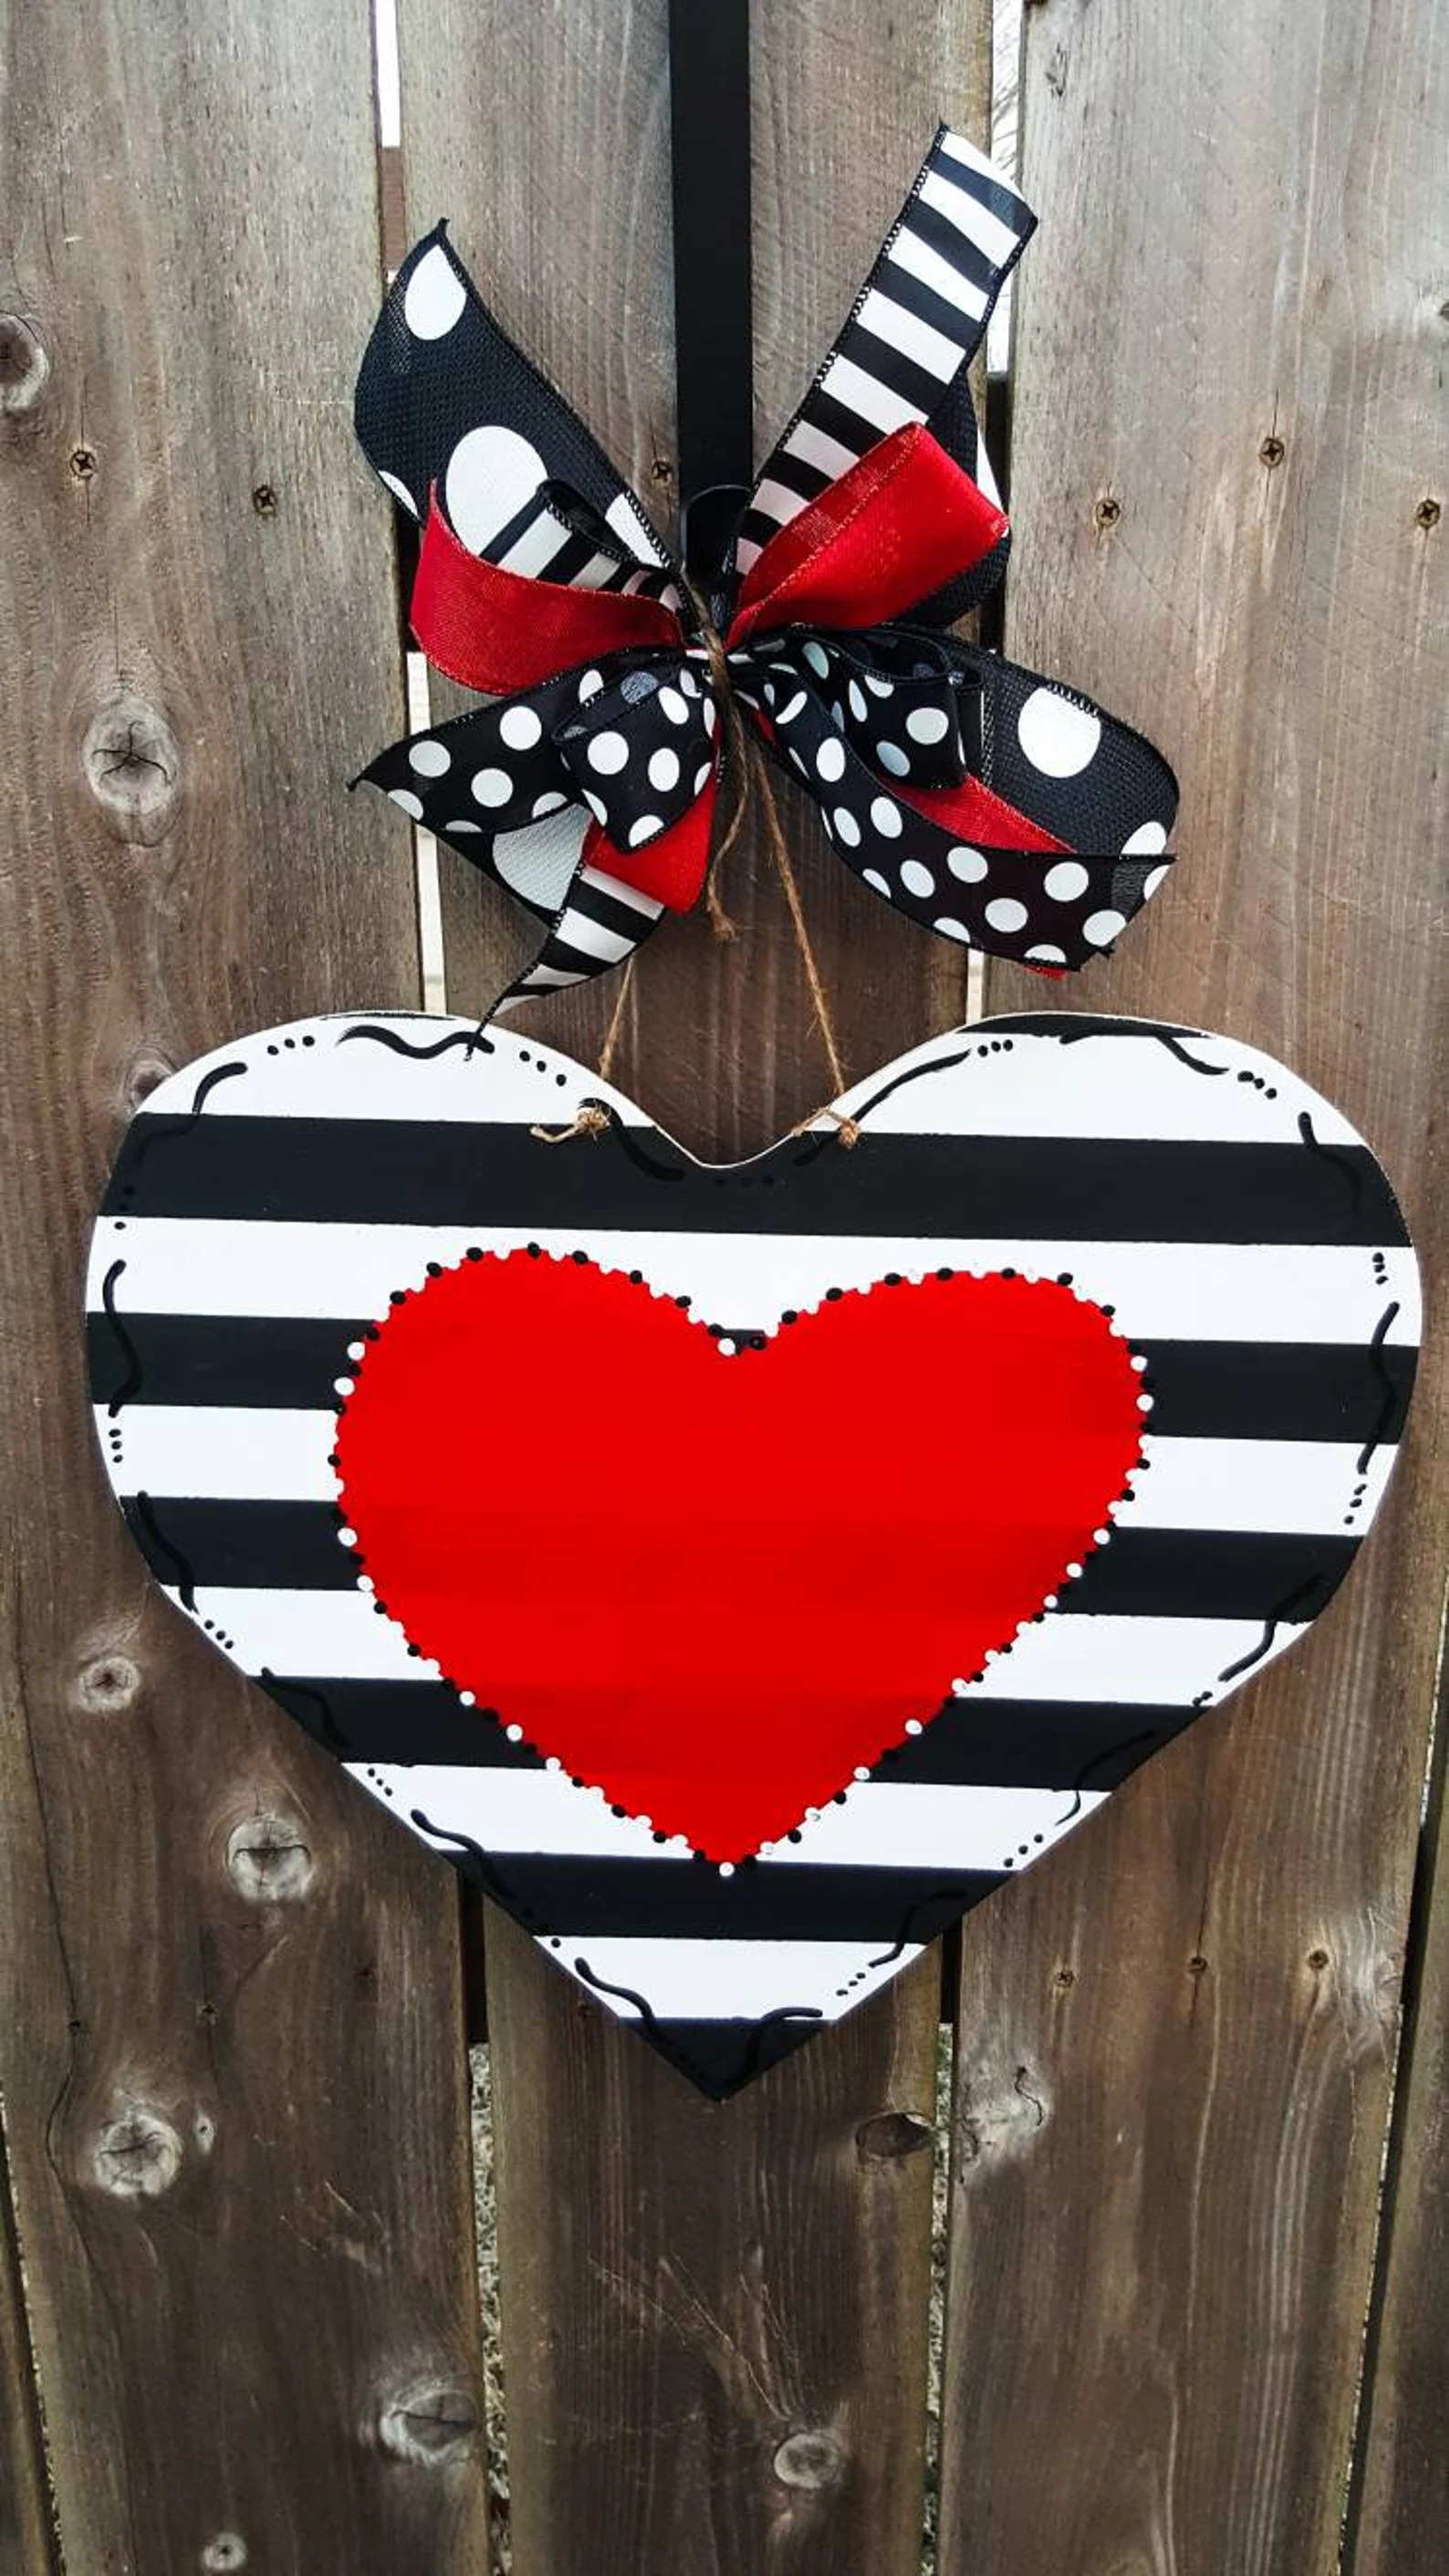 16 Adorable Rustic Valentine's Day Heart Decorations To Set A Lovely Mood